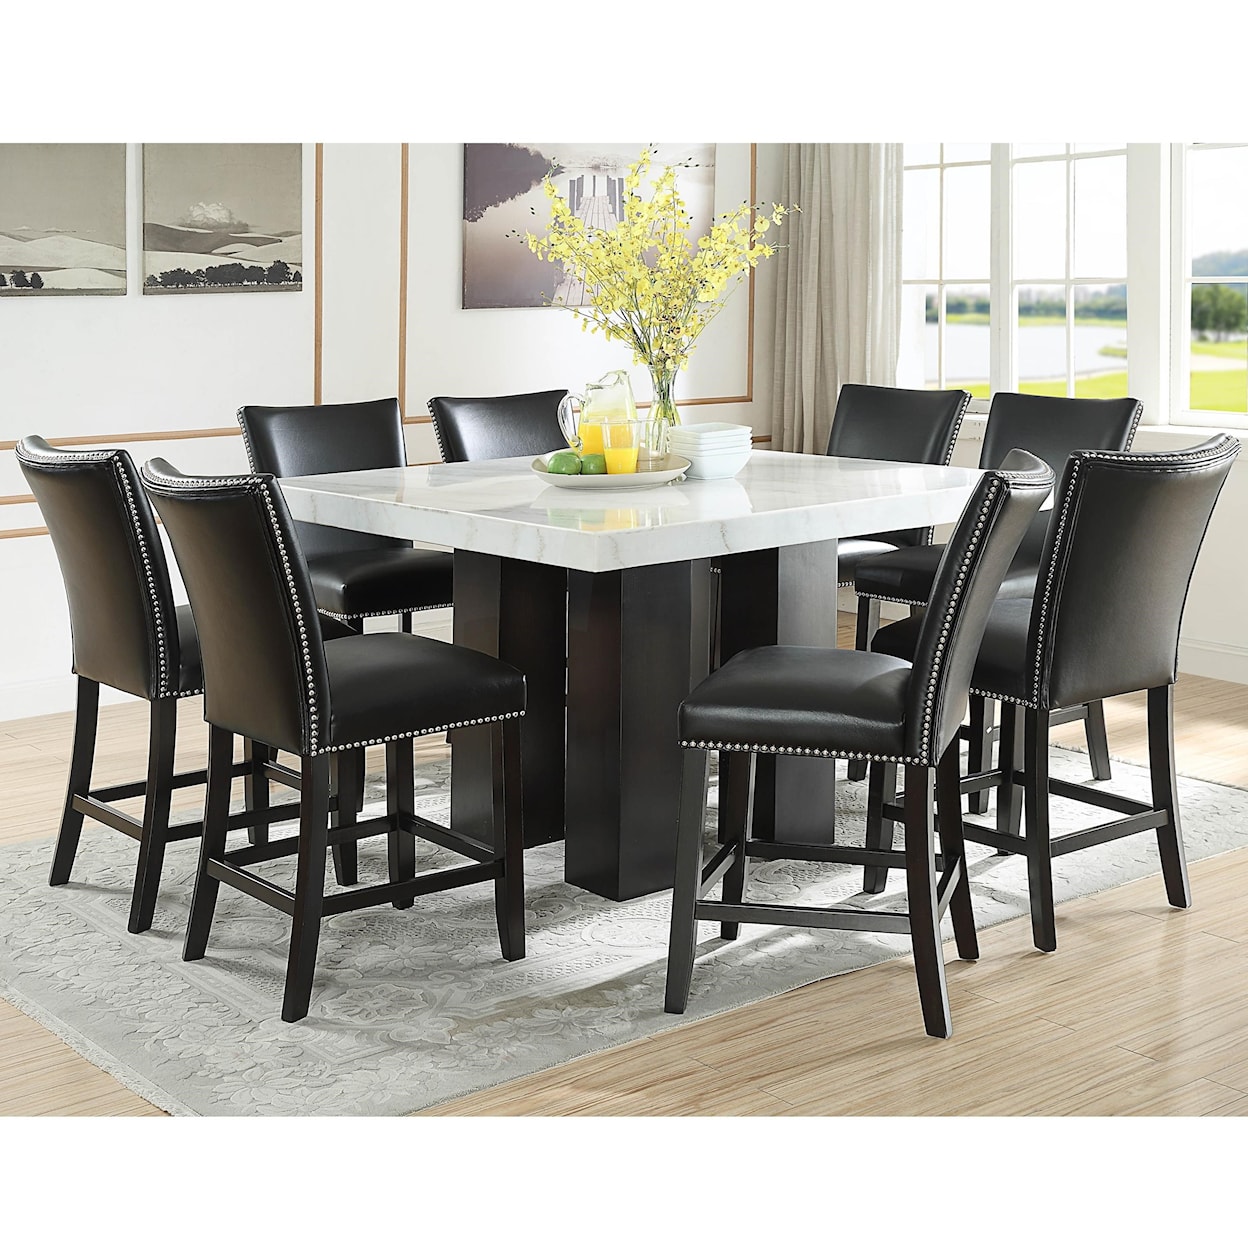 Steve Silver Camila 9 Piece Counter Height Dining Set